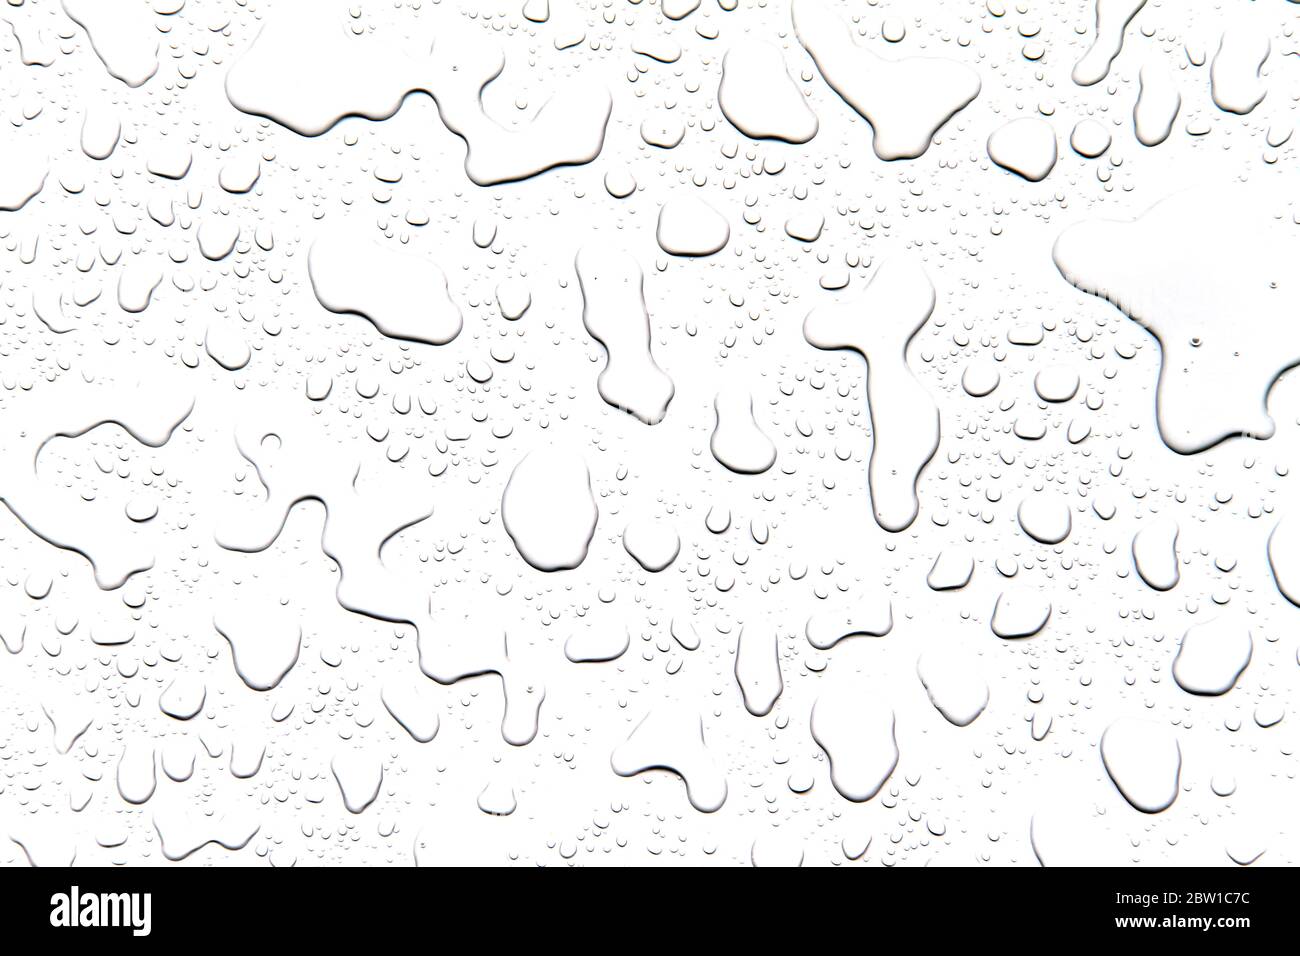 The concept of water drops on a white background Stock Photo